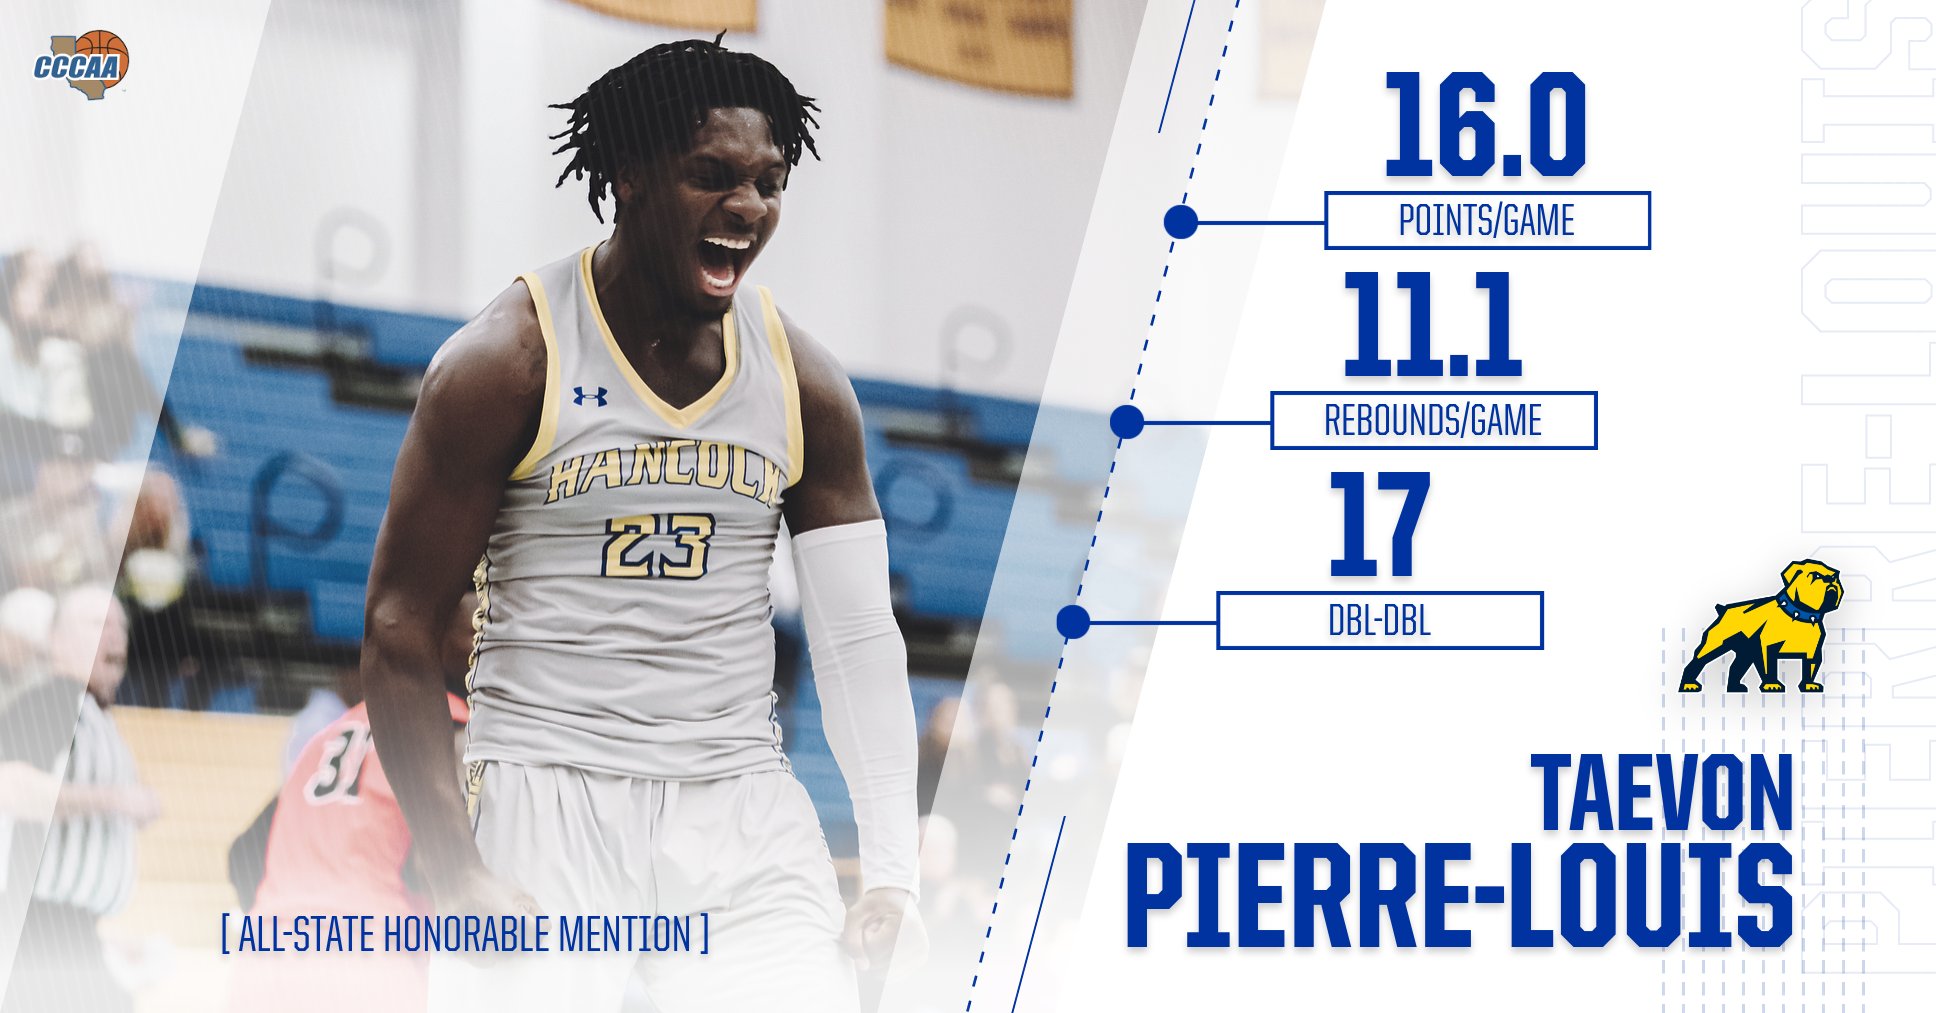 Men's Basketball: Pierre-Louis Named to CCCMBCA All-State Honorable Mention List